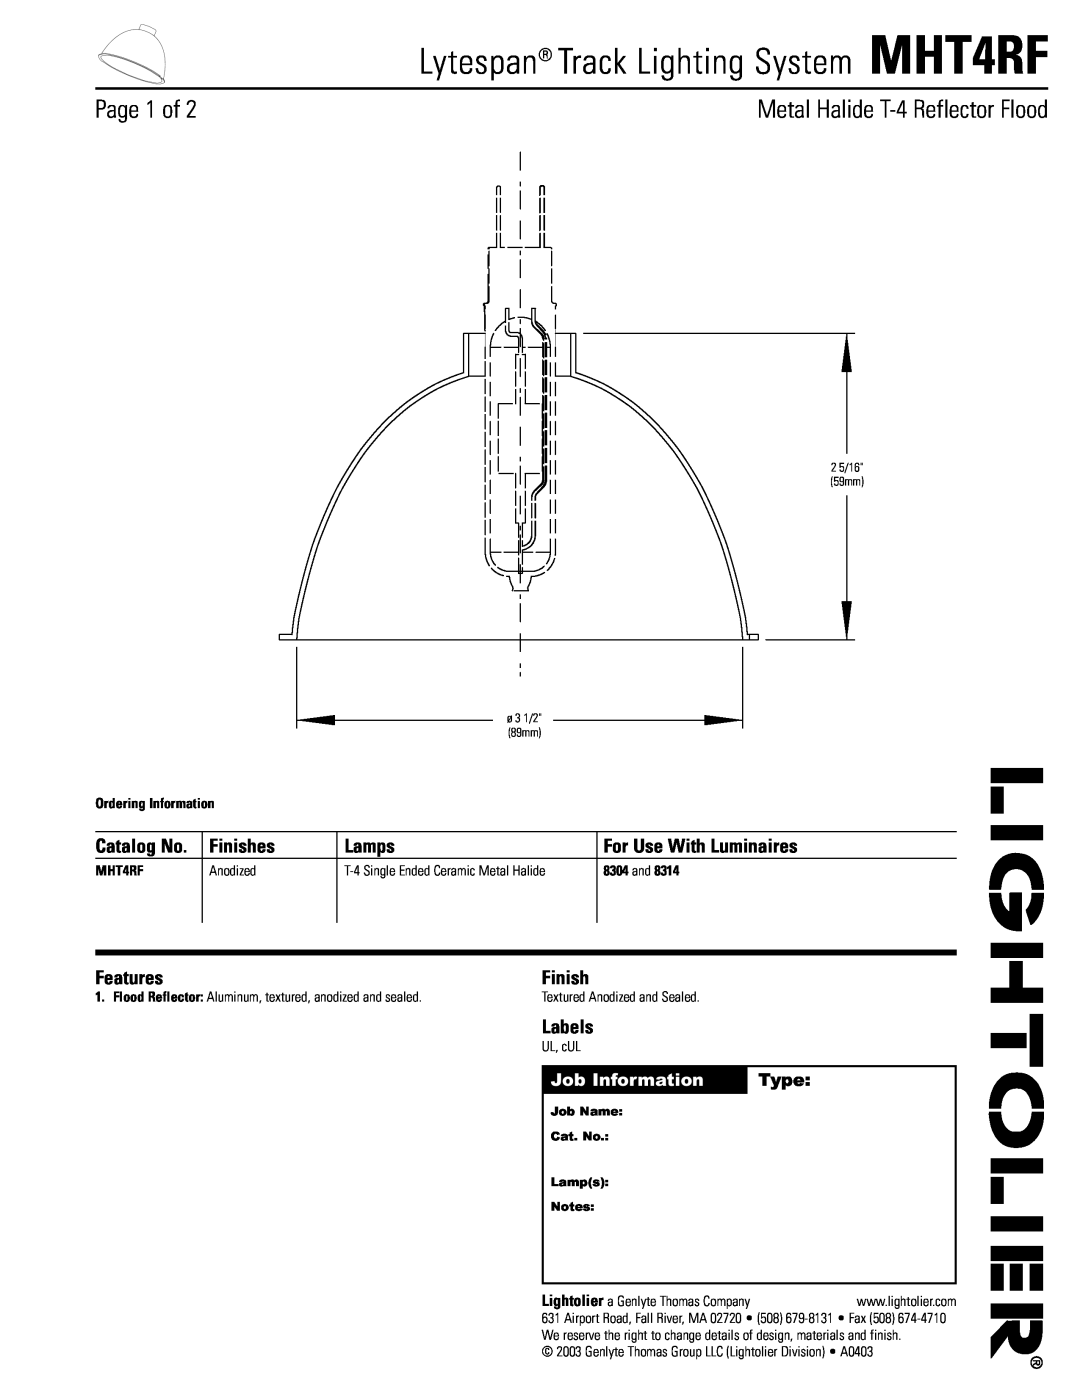 Lightolier manual Lytespan Track Lighting System MHT4RF, Finishes, Lamps, For Use With Luminaires, Features, Labels 